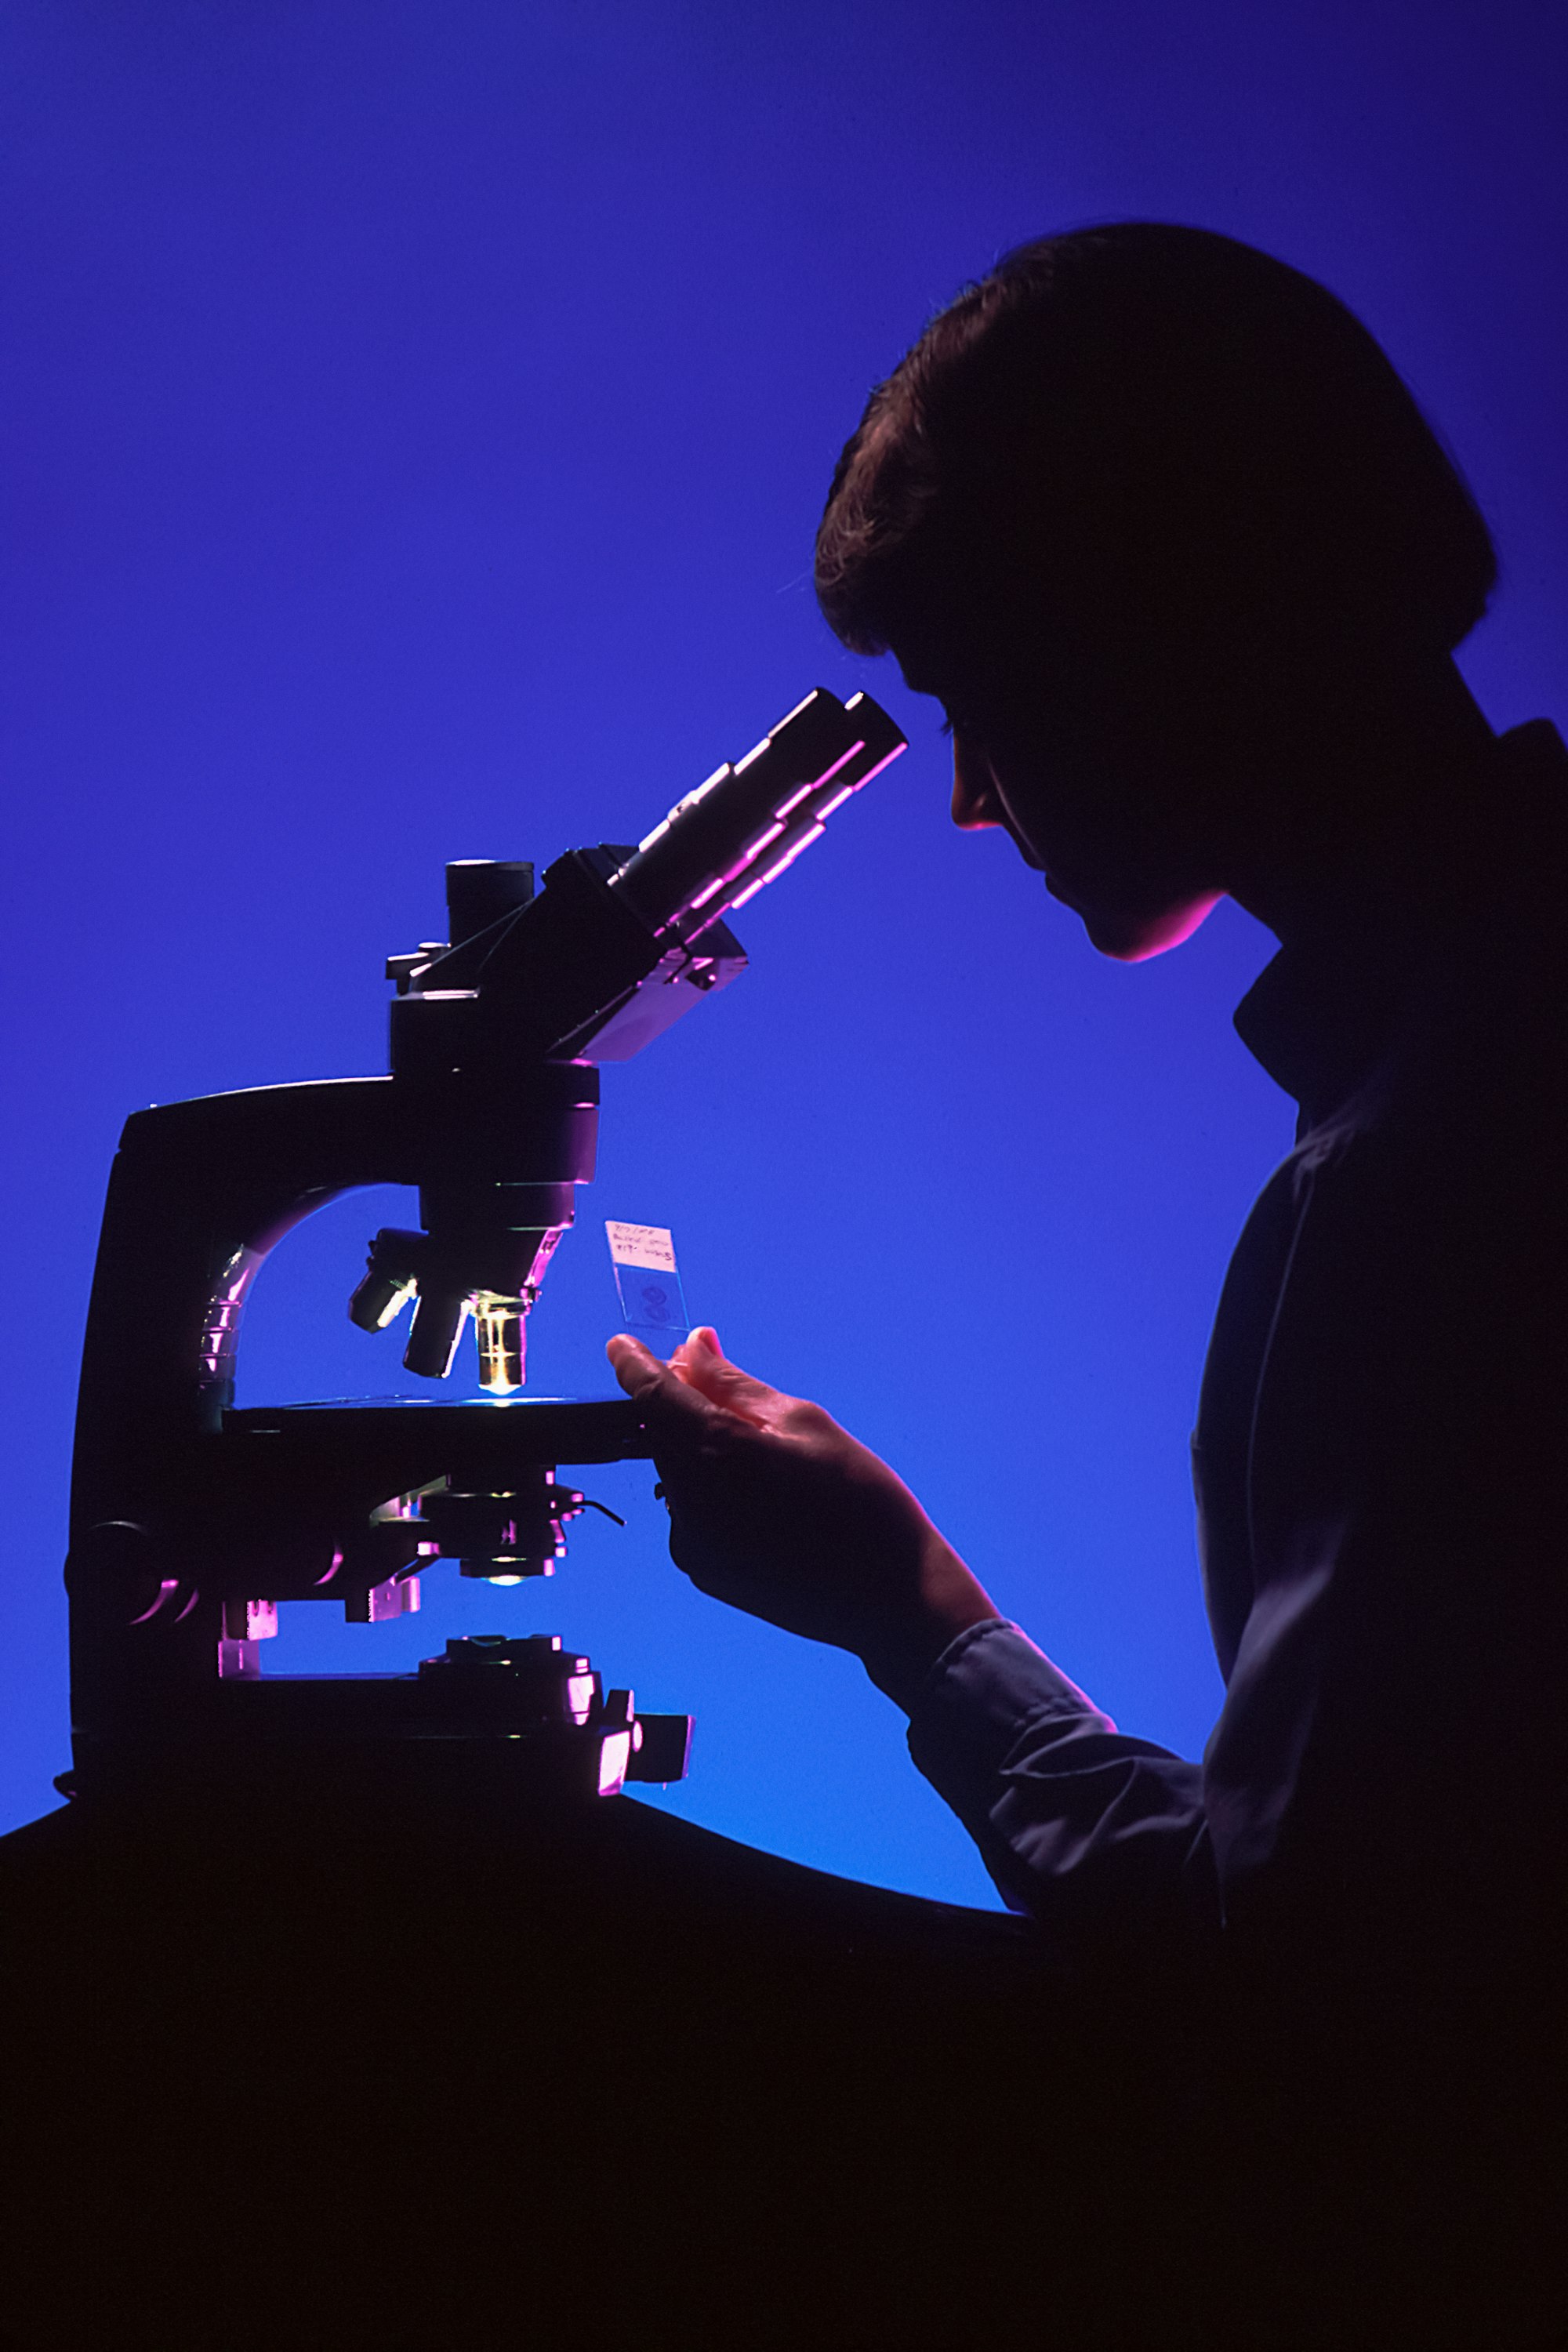 A profile of a female pathologist viewing a histological slide while sitting at a microscope. This dramatic shot has a blue background, with the microscope and the pathologist's features highlighted with magenta. Light is seen passing through the microscope's condensor to the objectives.